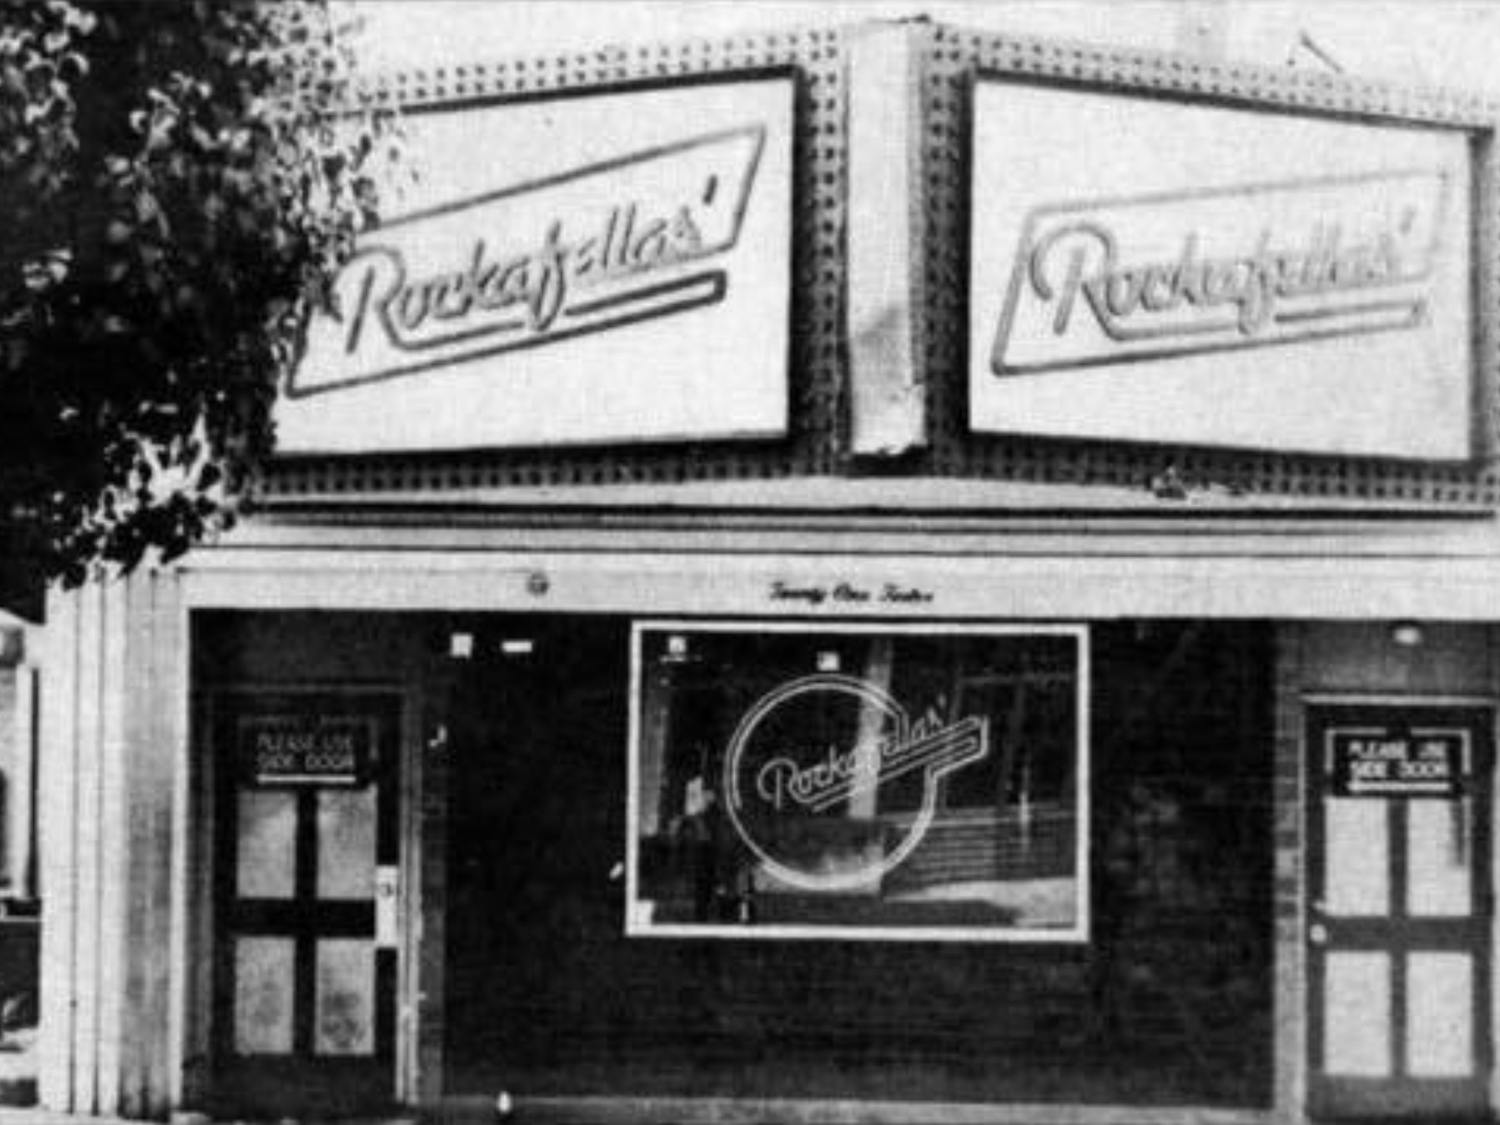 The front entrance of the now-closed Rockafella's. The space was a live music venue before becoming Jake's Bar &amp; Grill in the early 2000s.